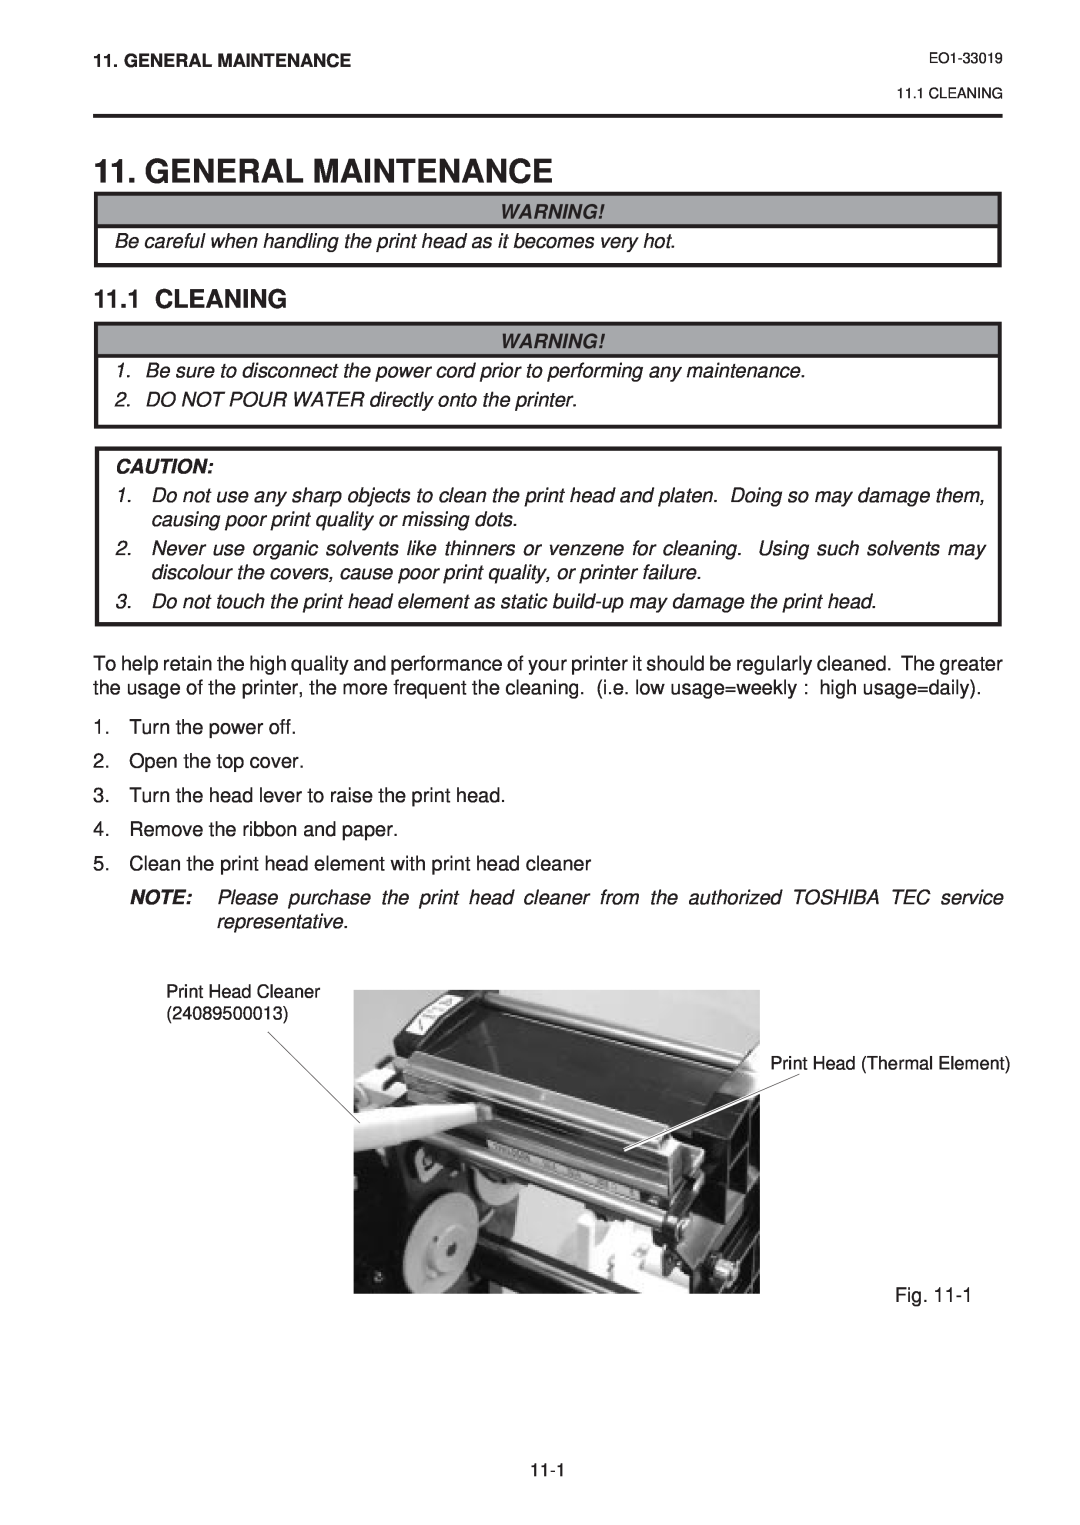 Toshiba B-450-HS-QQ owner manual General Maintenance, Cleaning 